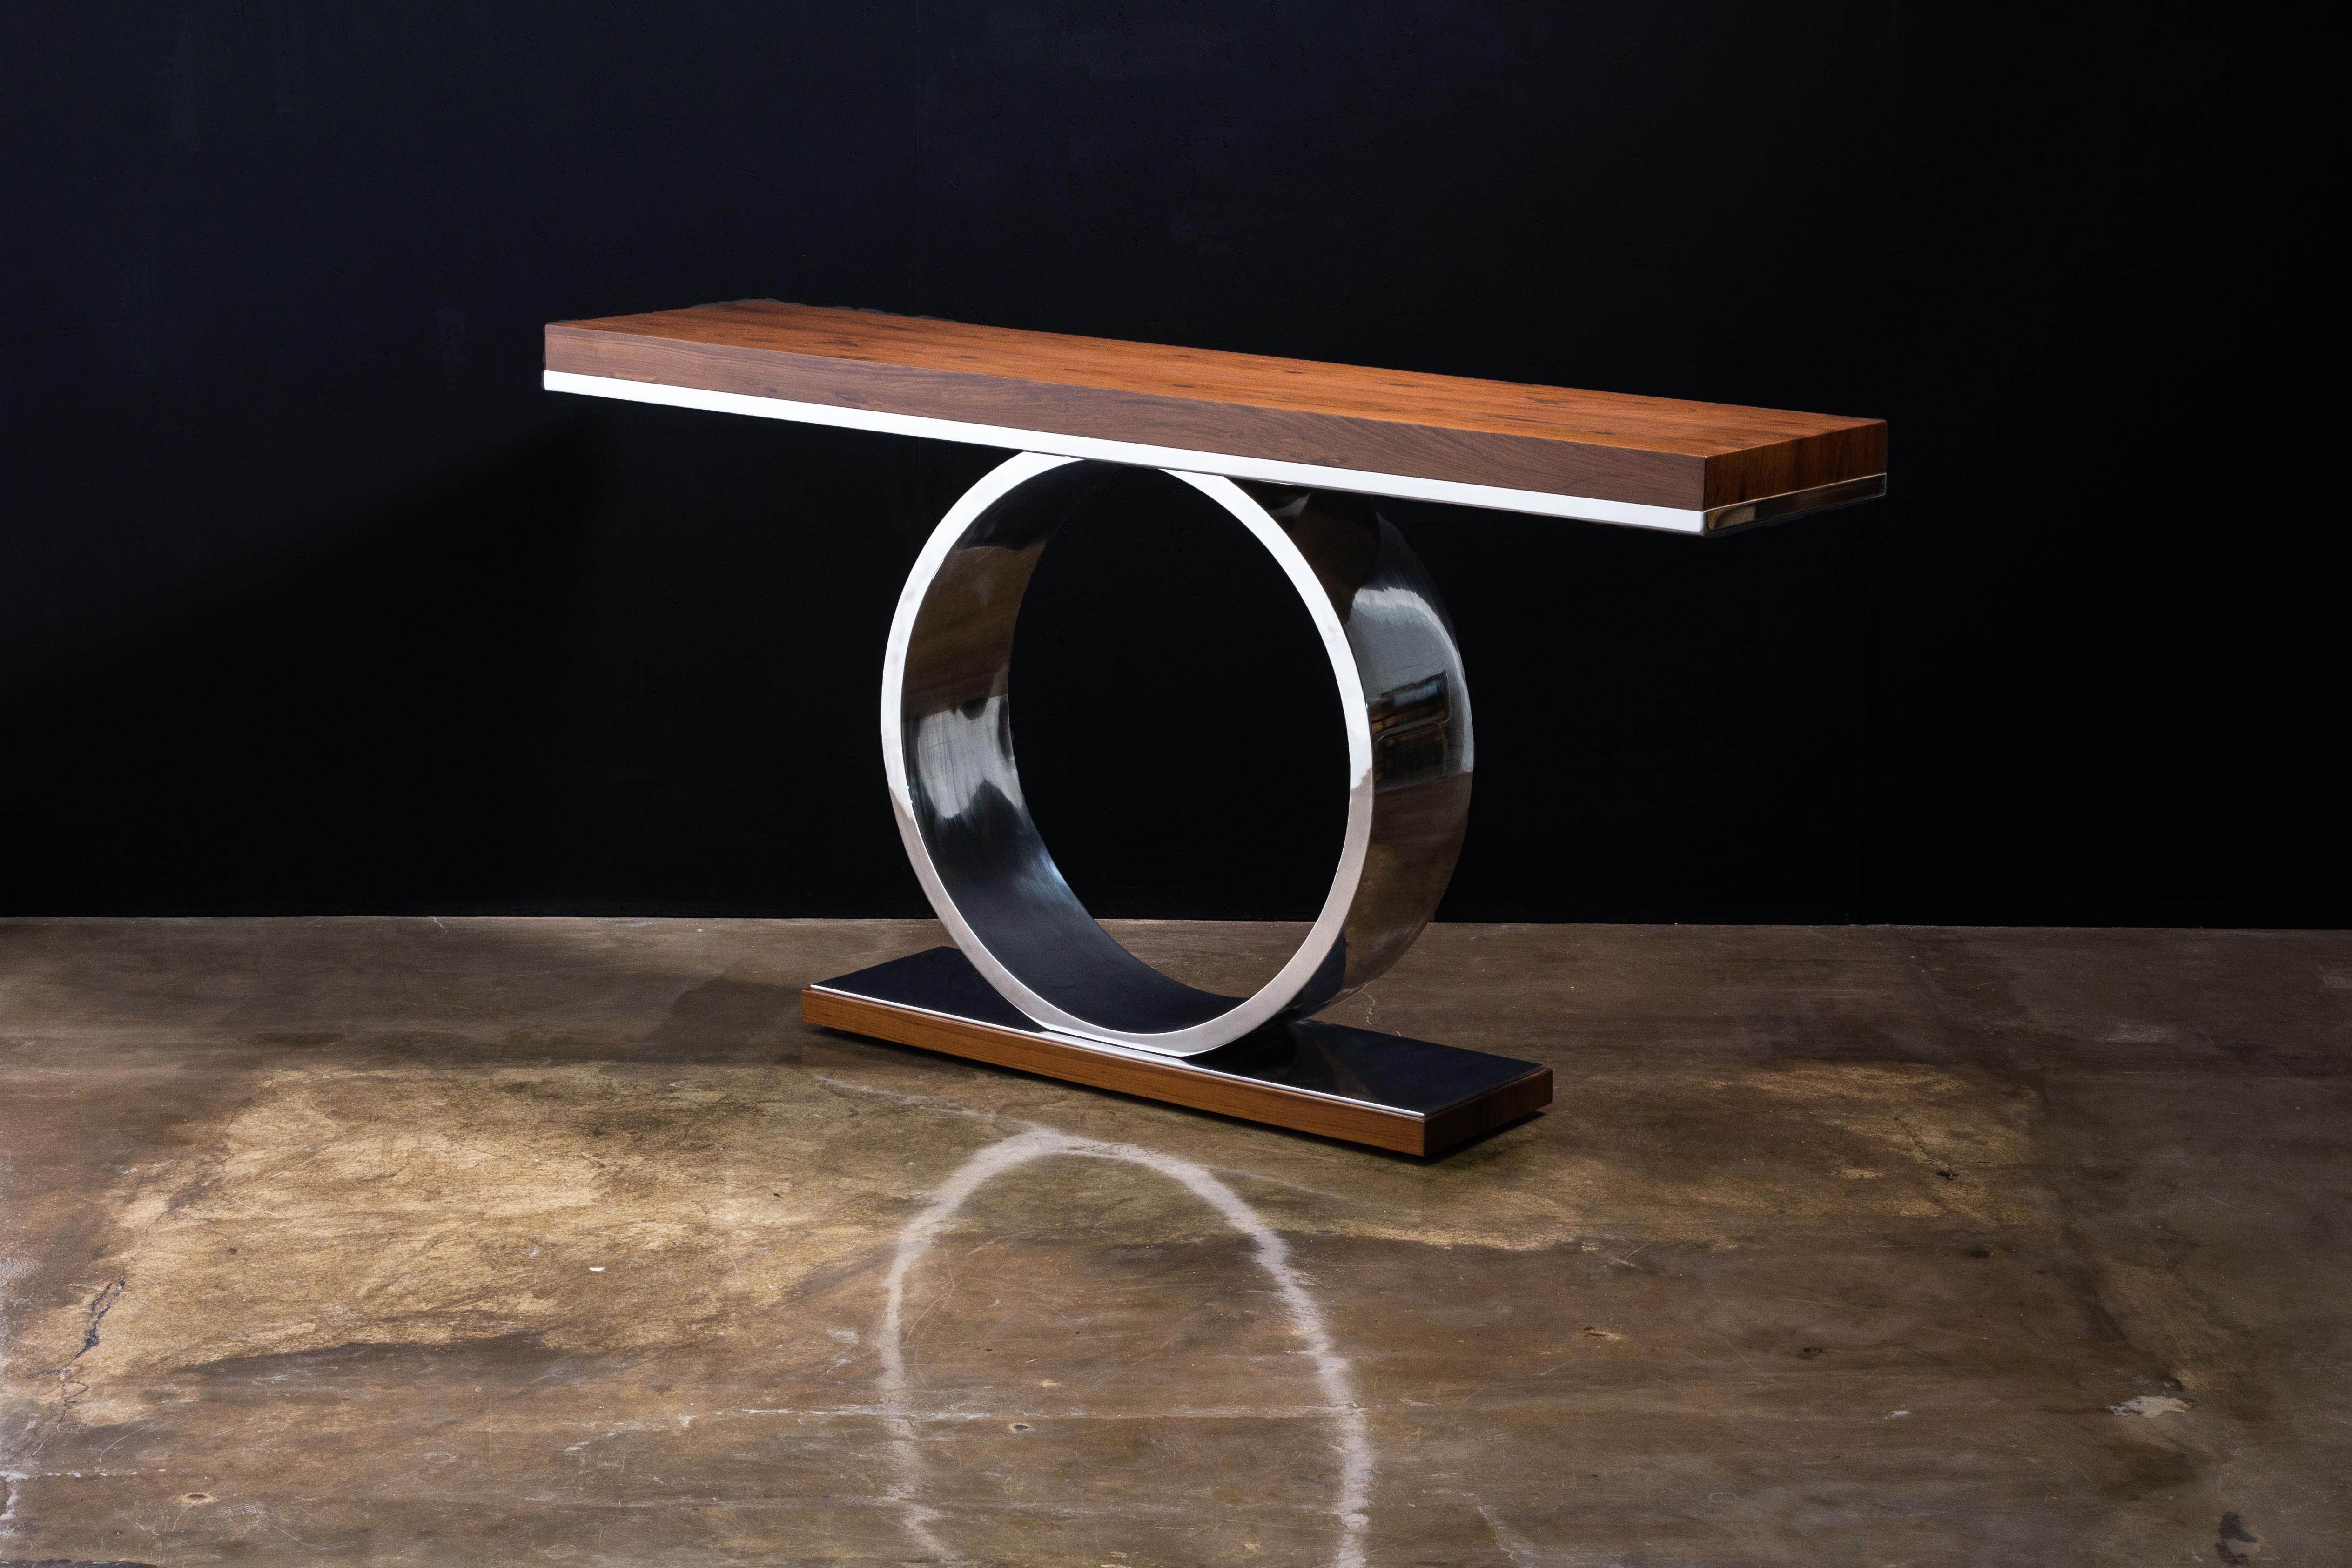 Donte Modern Sculptural Polished Steel and Wood Console Table from Costantini

The Donte console table features a ring-shaped metal base, shown here in polished steel, supporting a high gloss wood top. Available in any species, size, or finish.